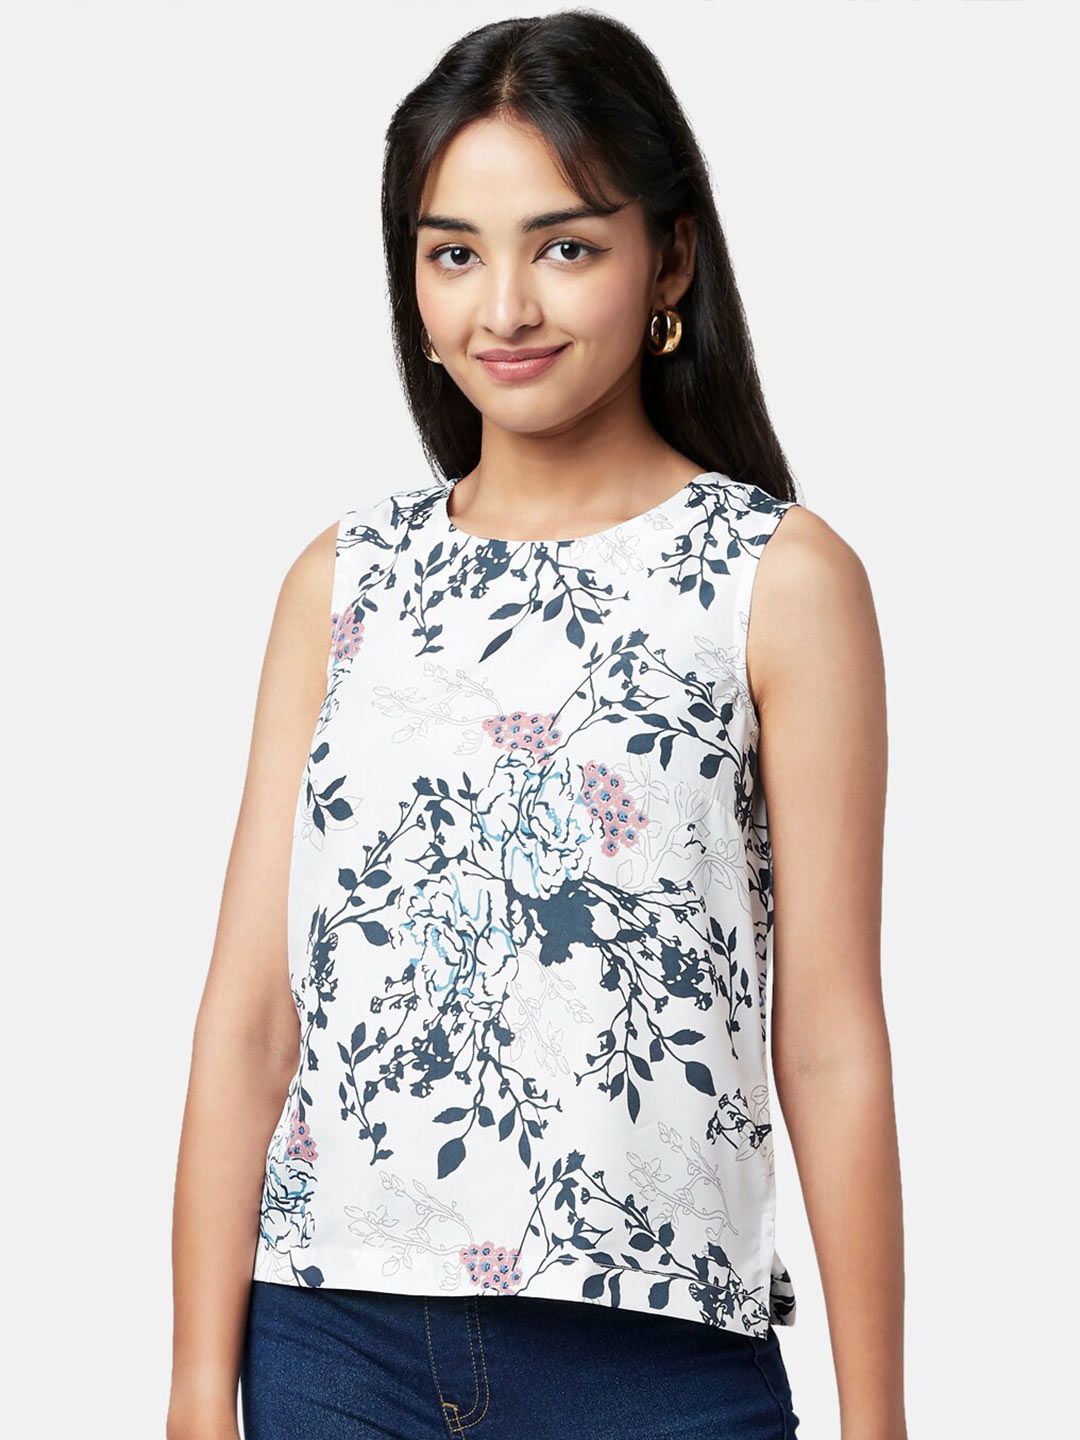 YU by Pantaloons White Floral Print Top Price in India